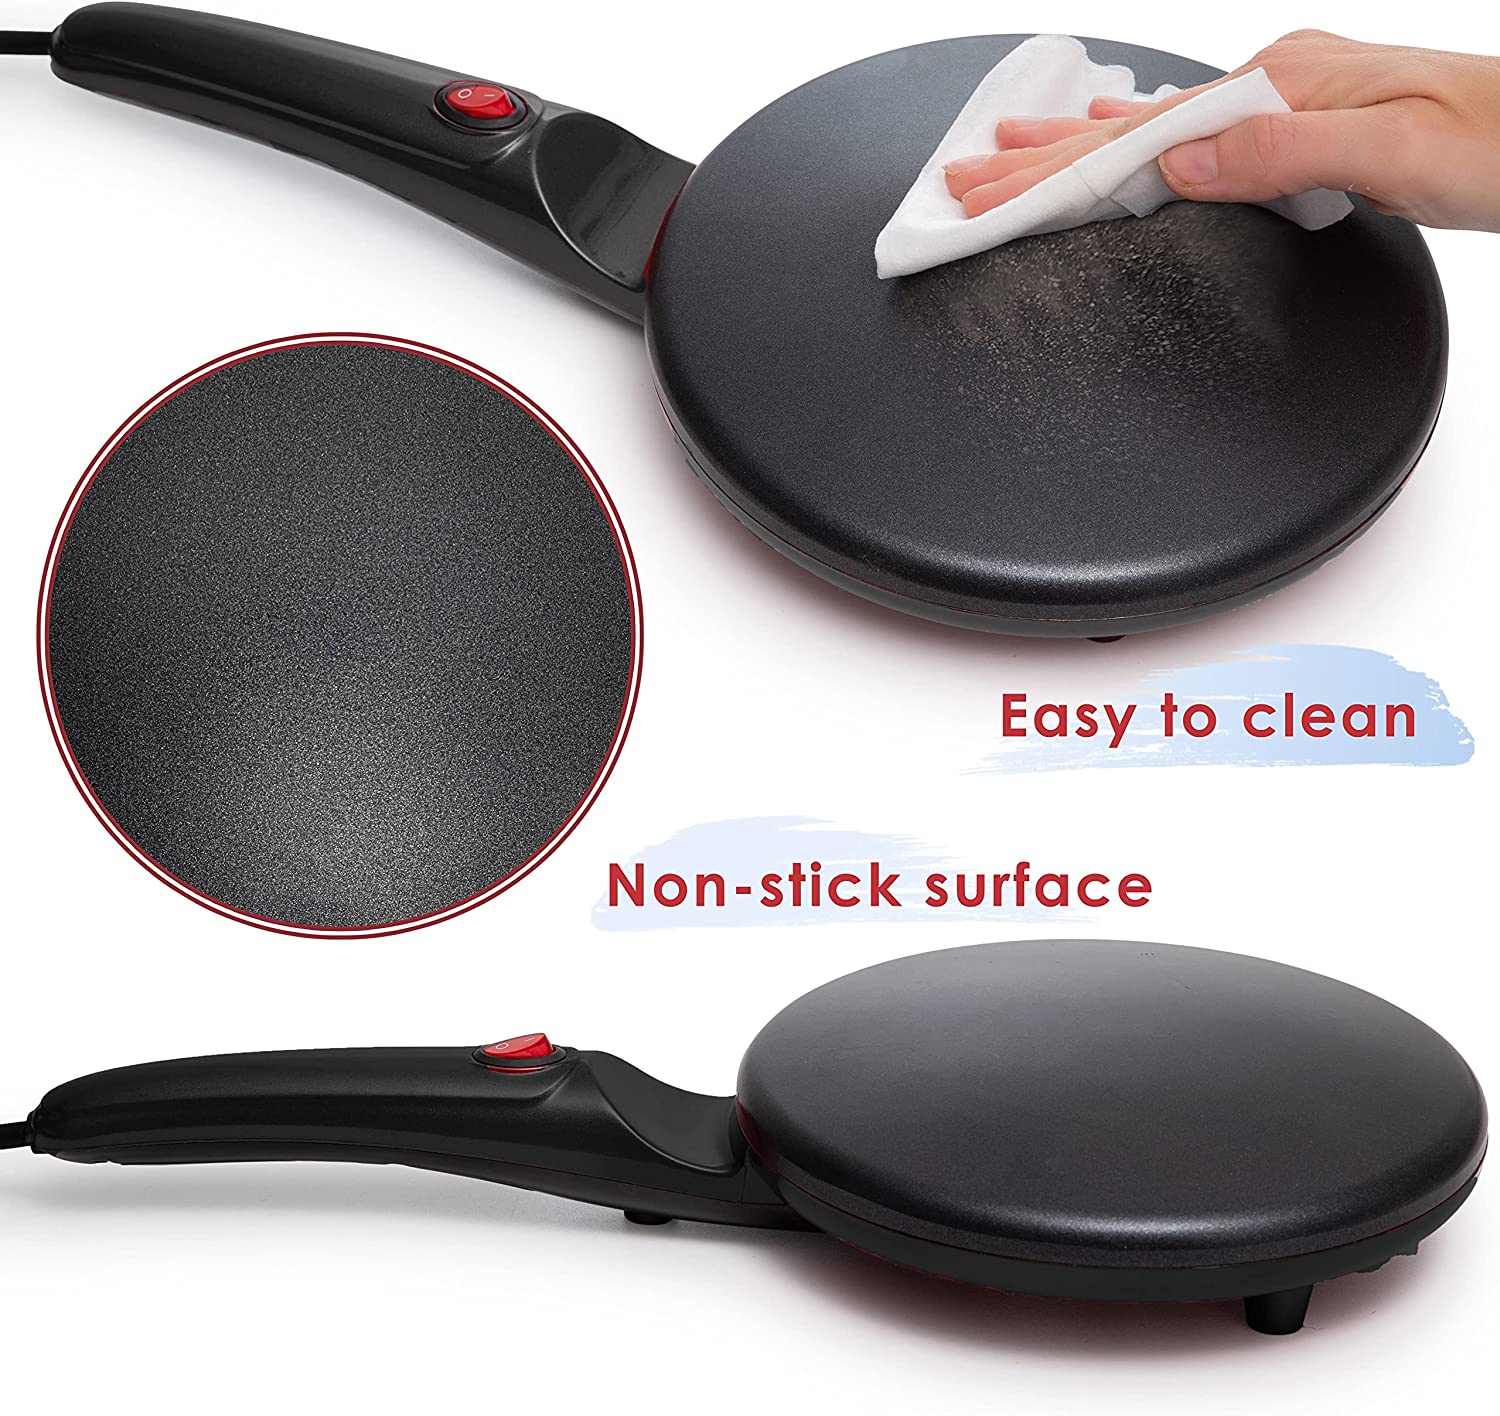 What Can a Crepe Pan Do for You? Unlock French Cuisine at Home with the Best Crepe Pan